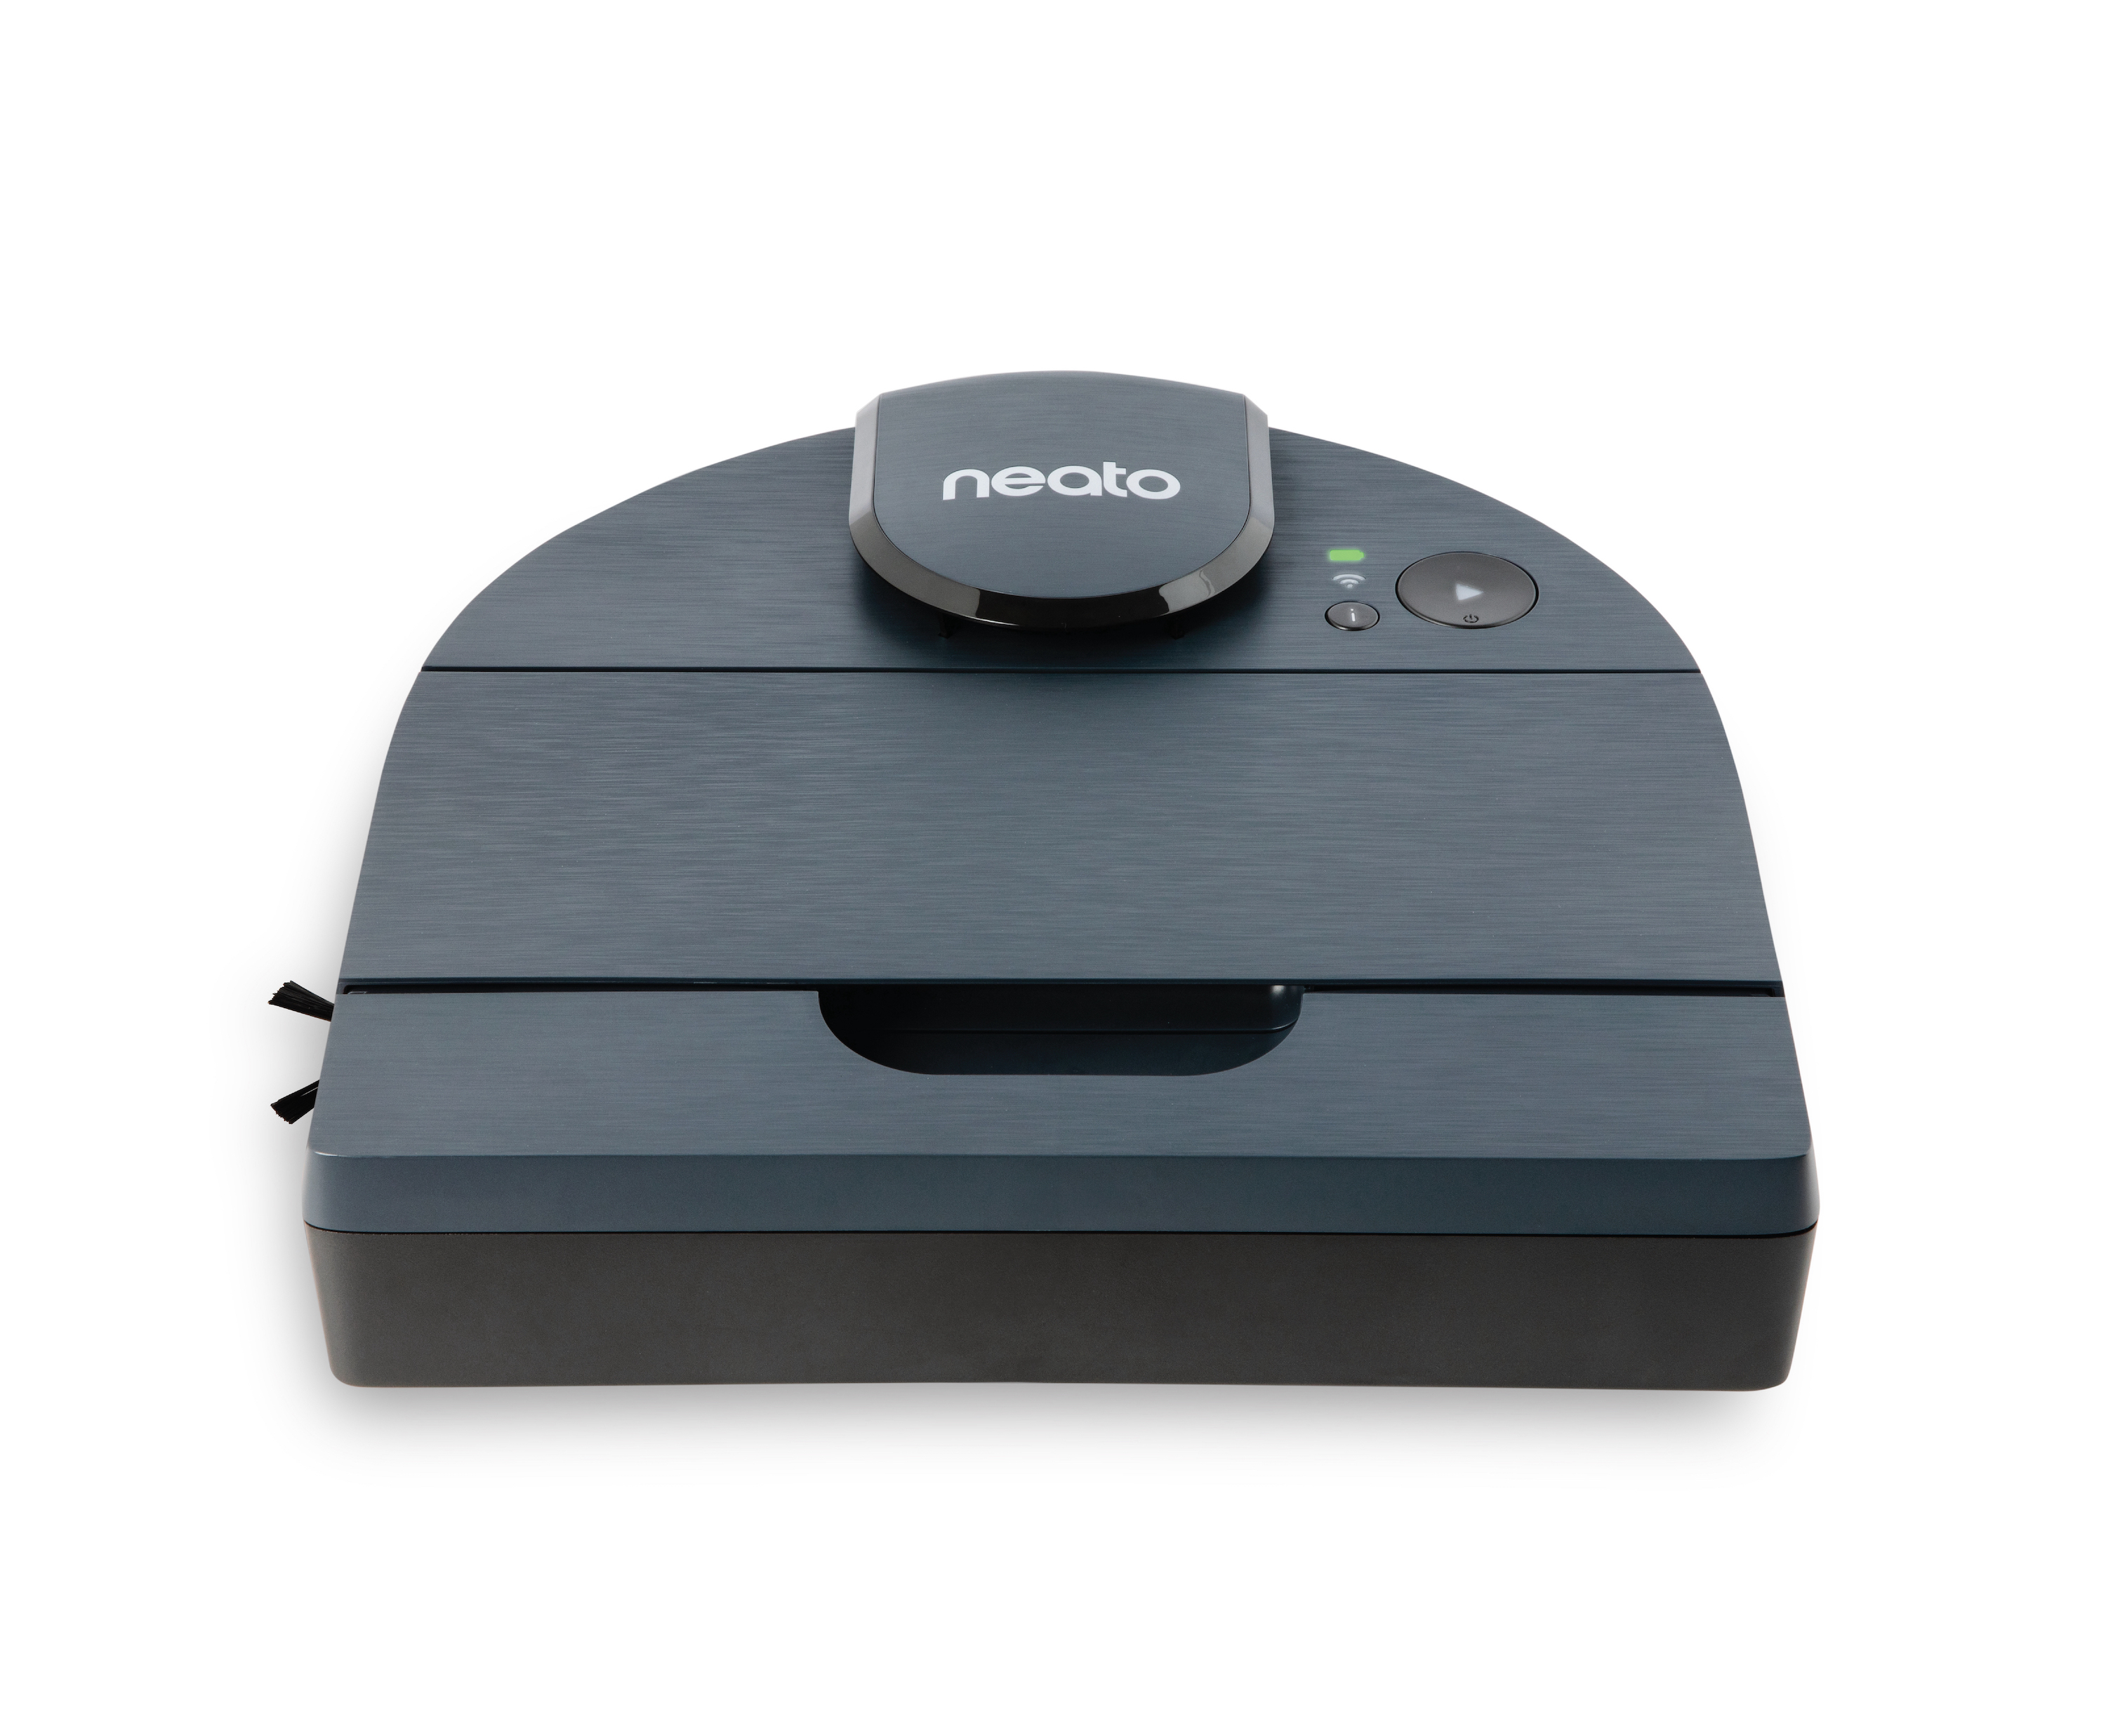 Neato D8 Intelligent Robot Vacuum Wi-Fi Connected with LIDAR Navigation in Indigo - image 1 of 23